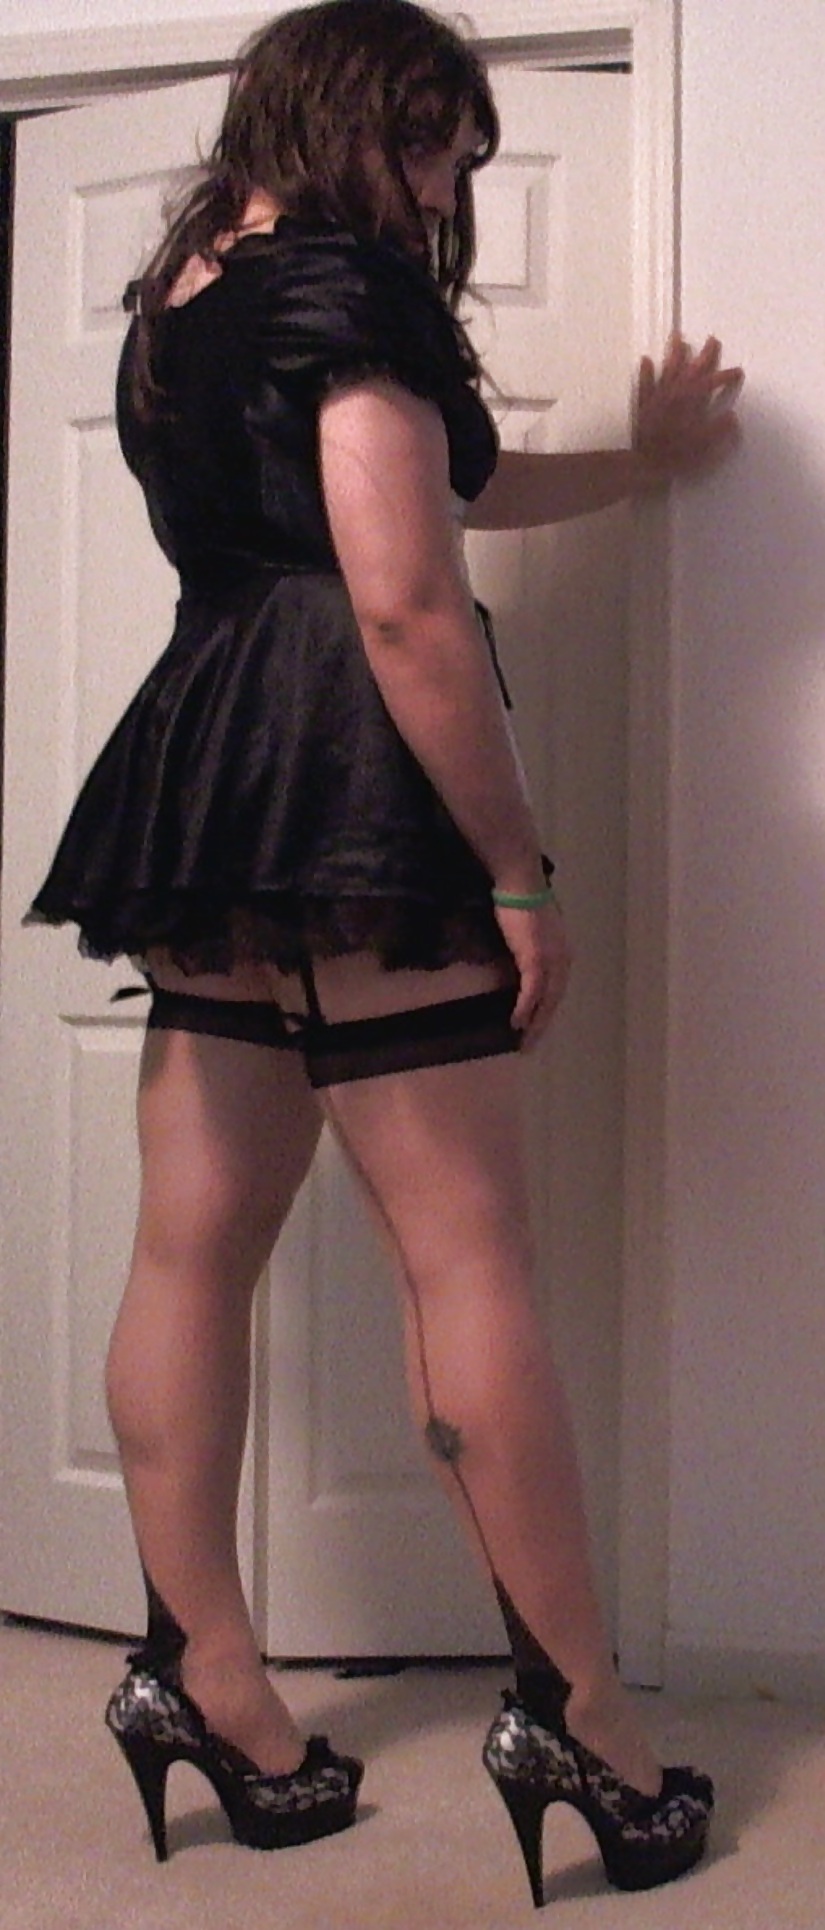 New Heels and Stockings #10131308